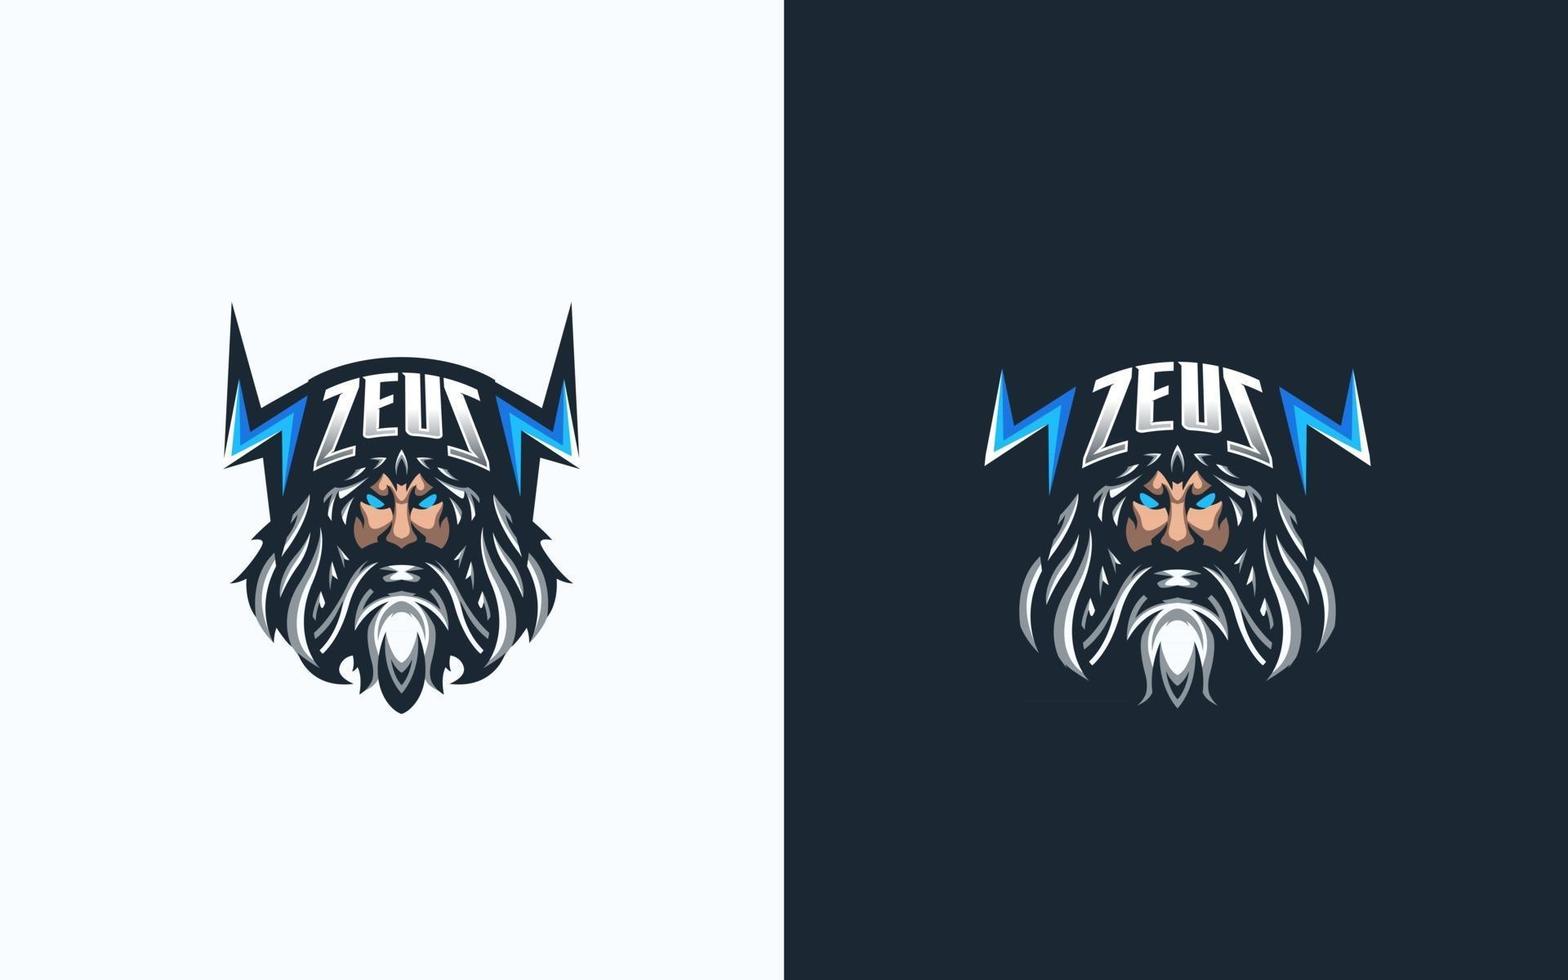 Zeus esport gaming mascot logo template for streamer team. esport logo design with modern illustration concept style for badge, emblem and tshirt printing vector